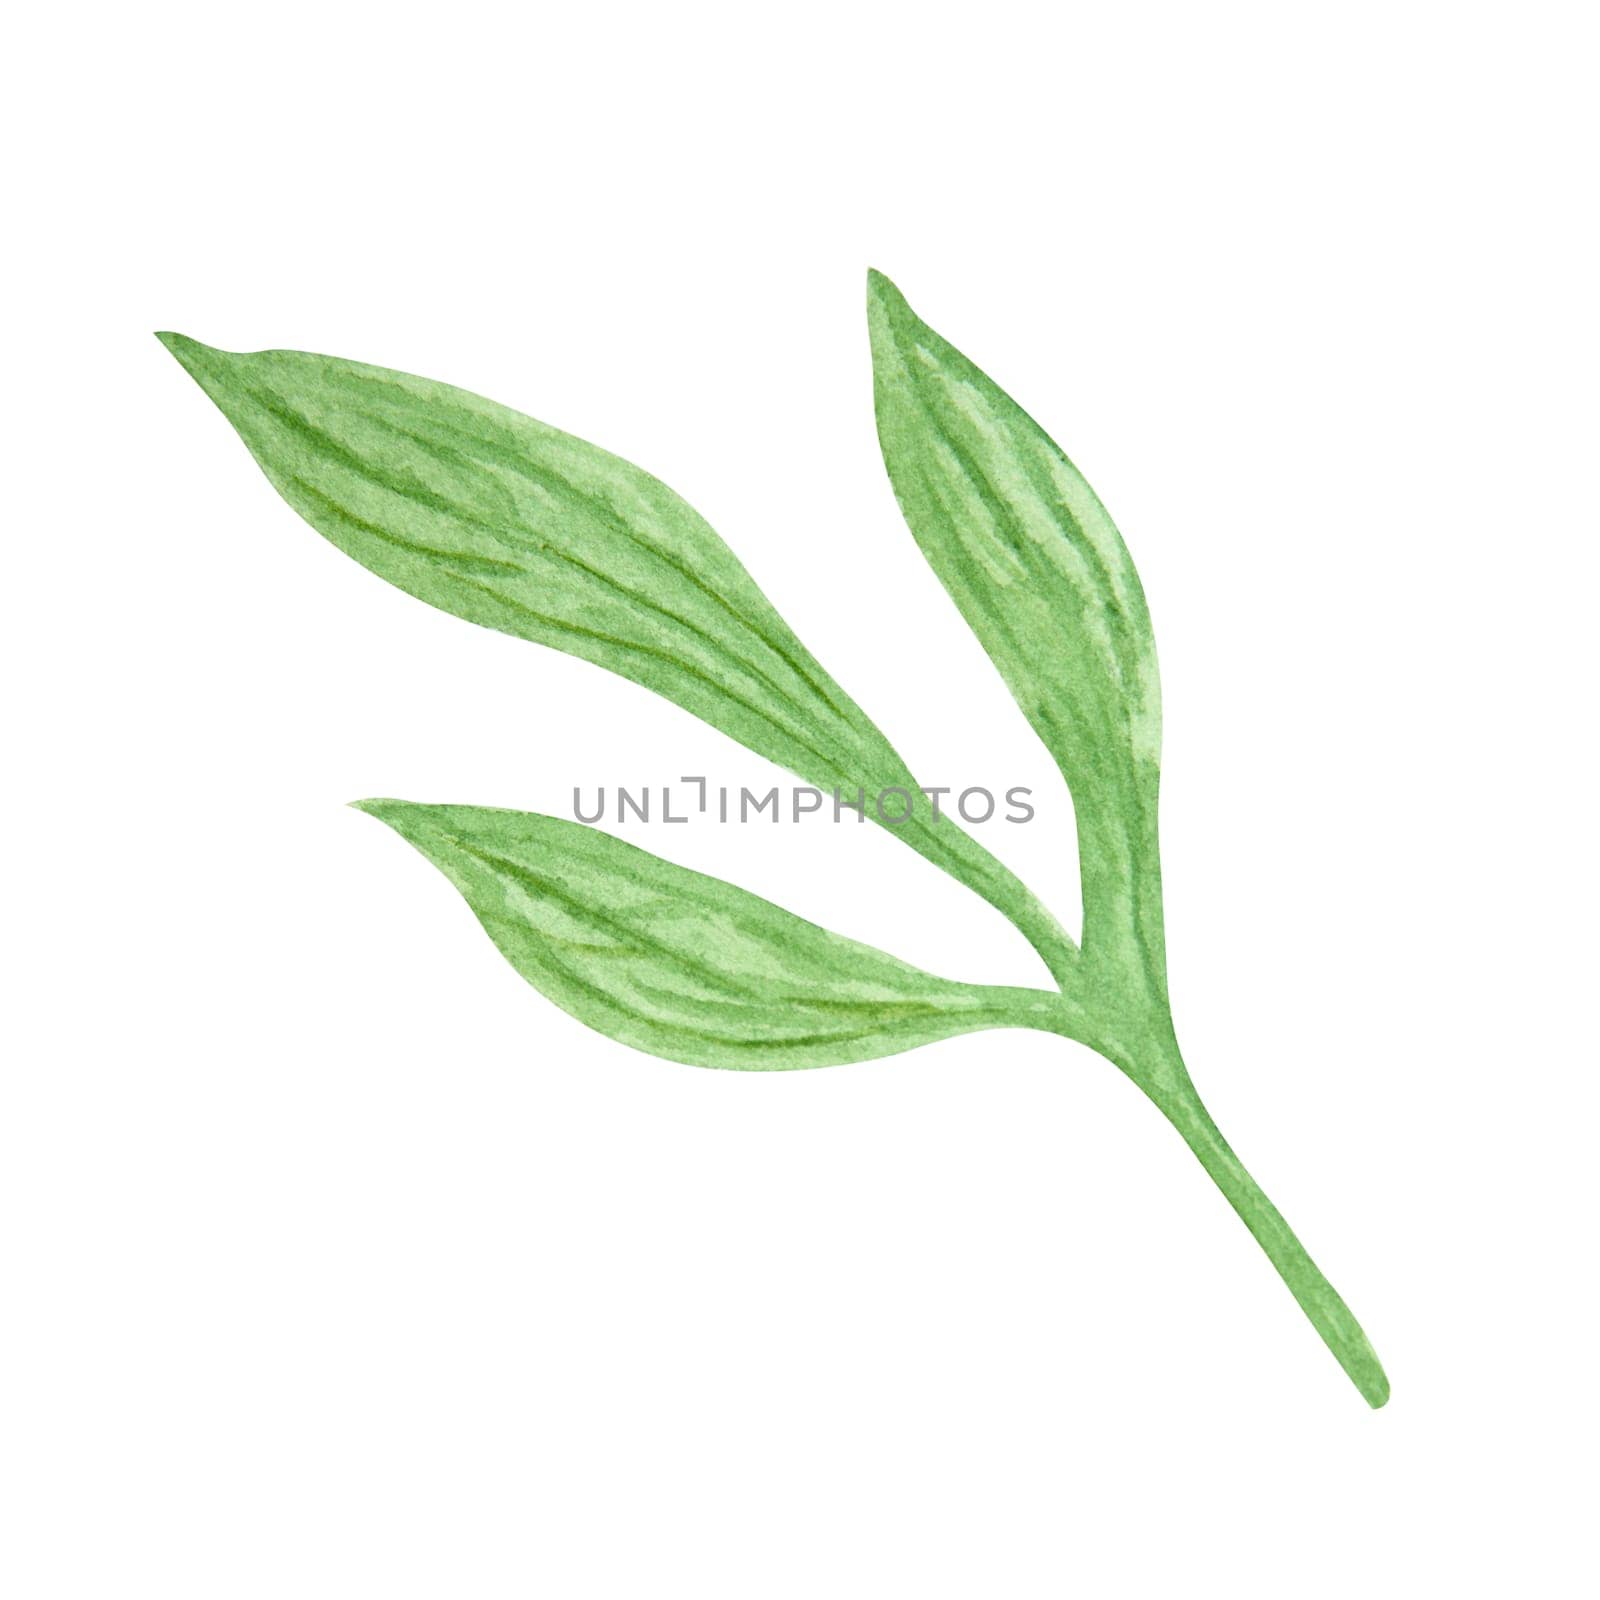 Peony leaves watercolor hand drawn painting. Realistic botanical clipart, floral arrangement. Chinese national symbol illustration. Perfect for card design, wedding invitation, print, textile, packing.